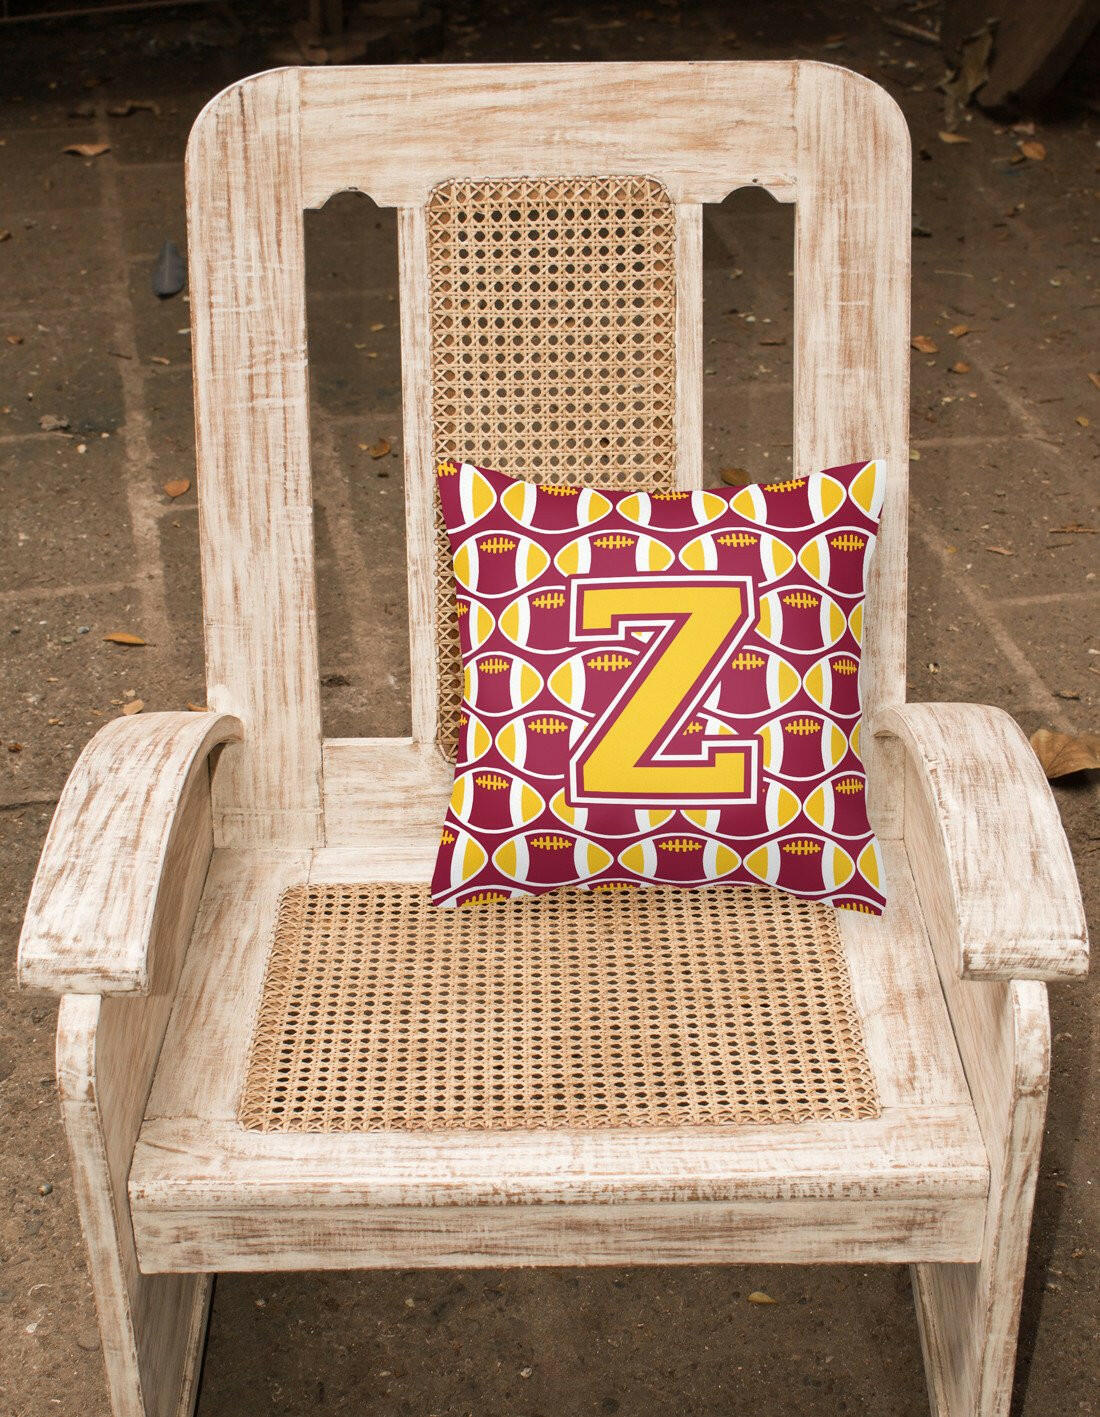 Letter Z Football Maroon and Gold Fabric Decorative Pillow CJ1081-ZPW1414 by Caroline's Treasures